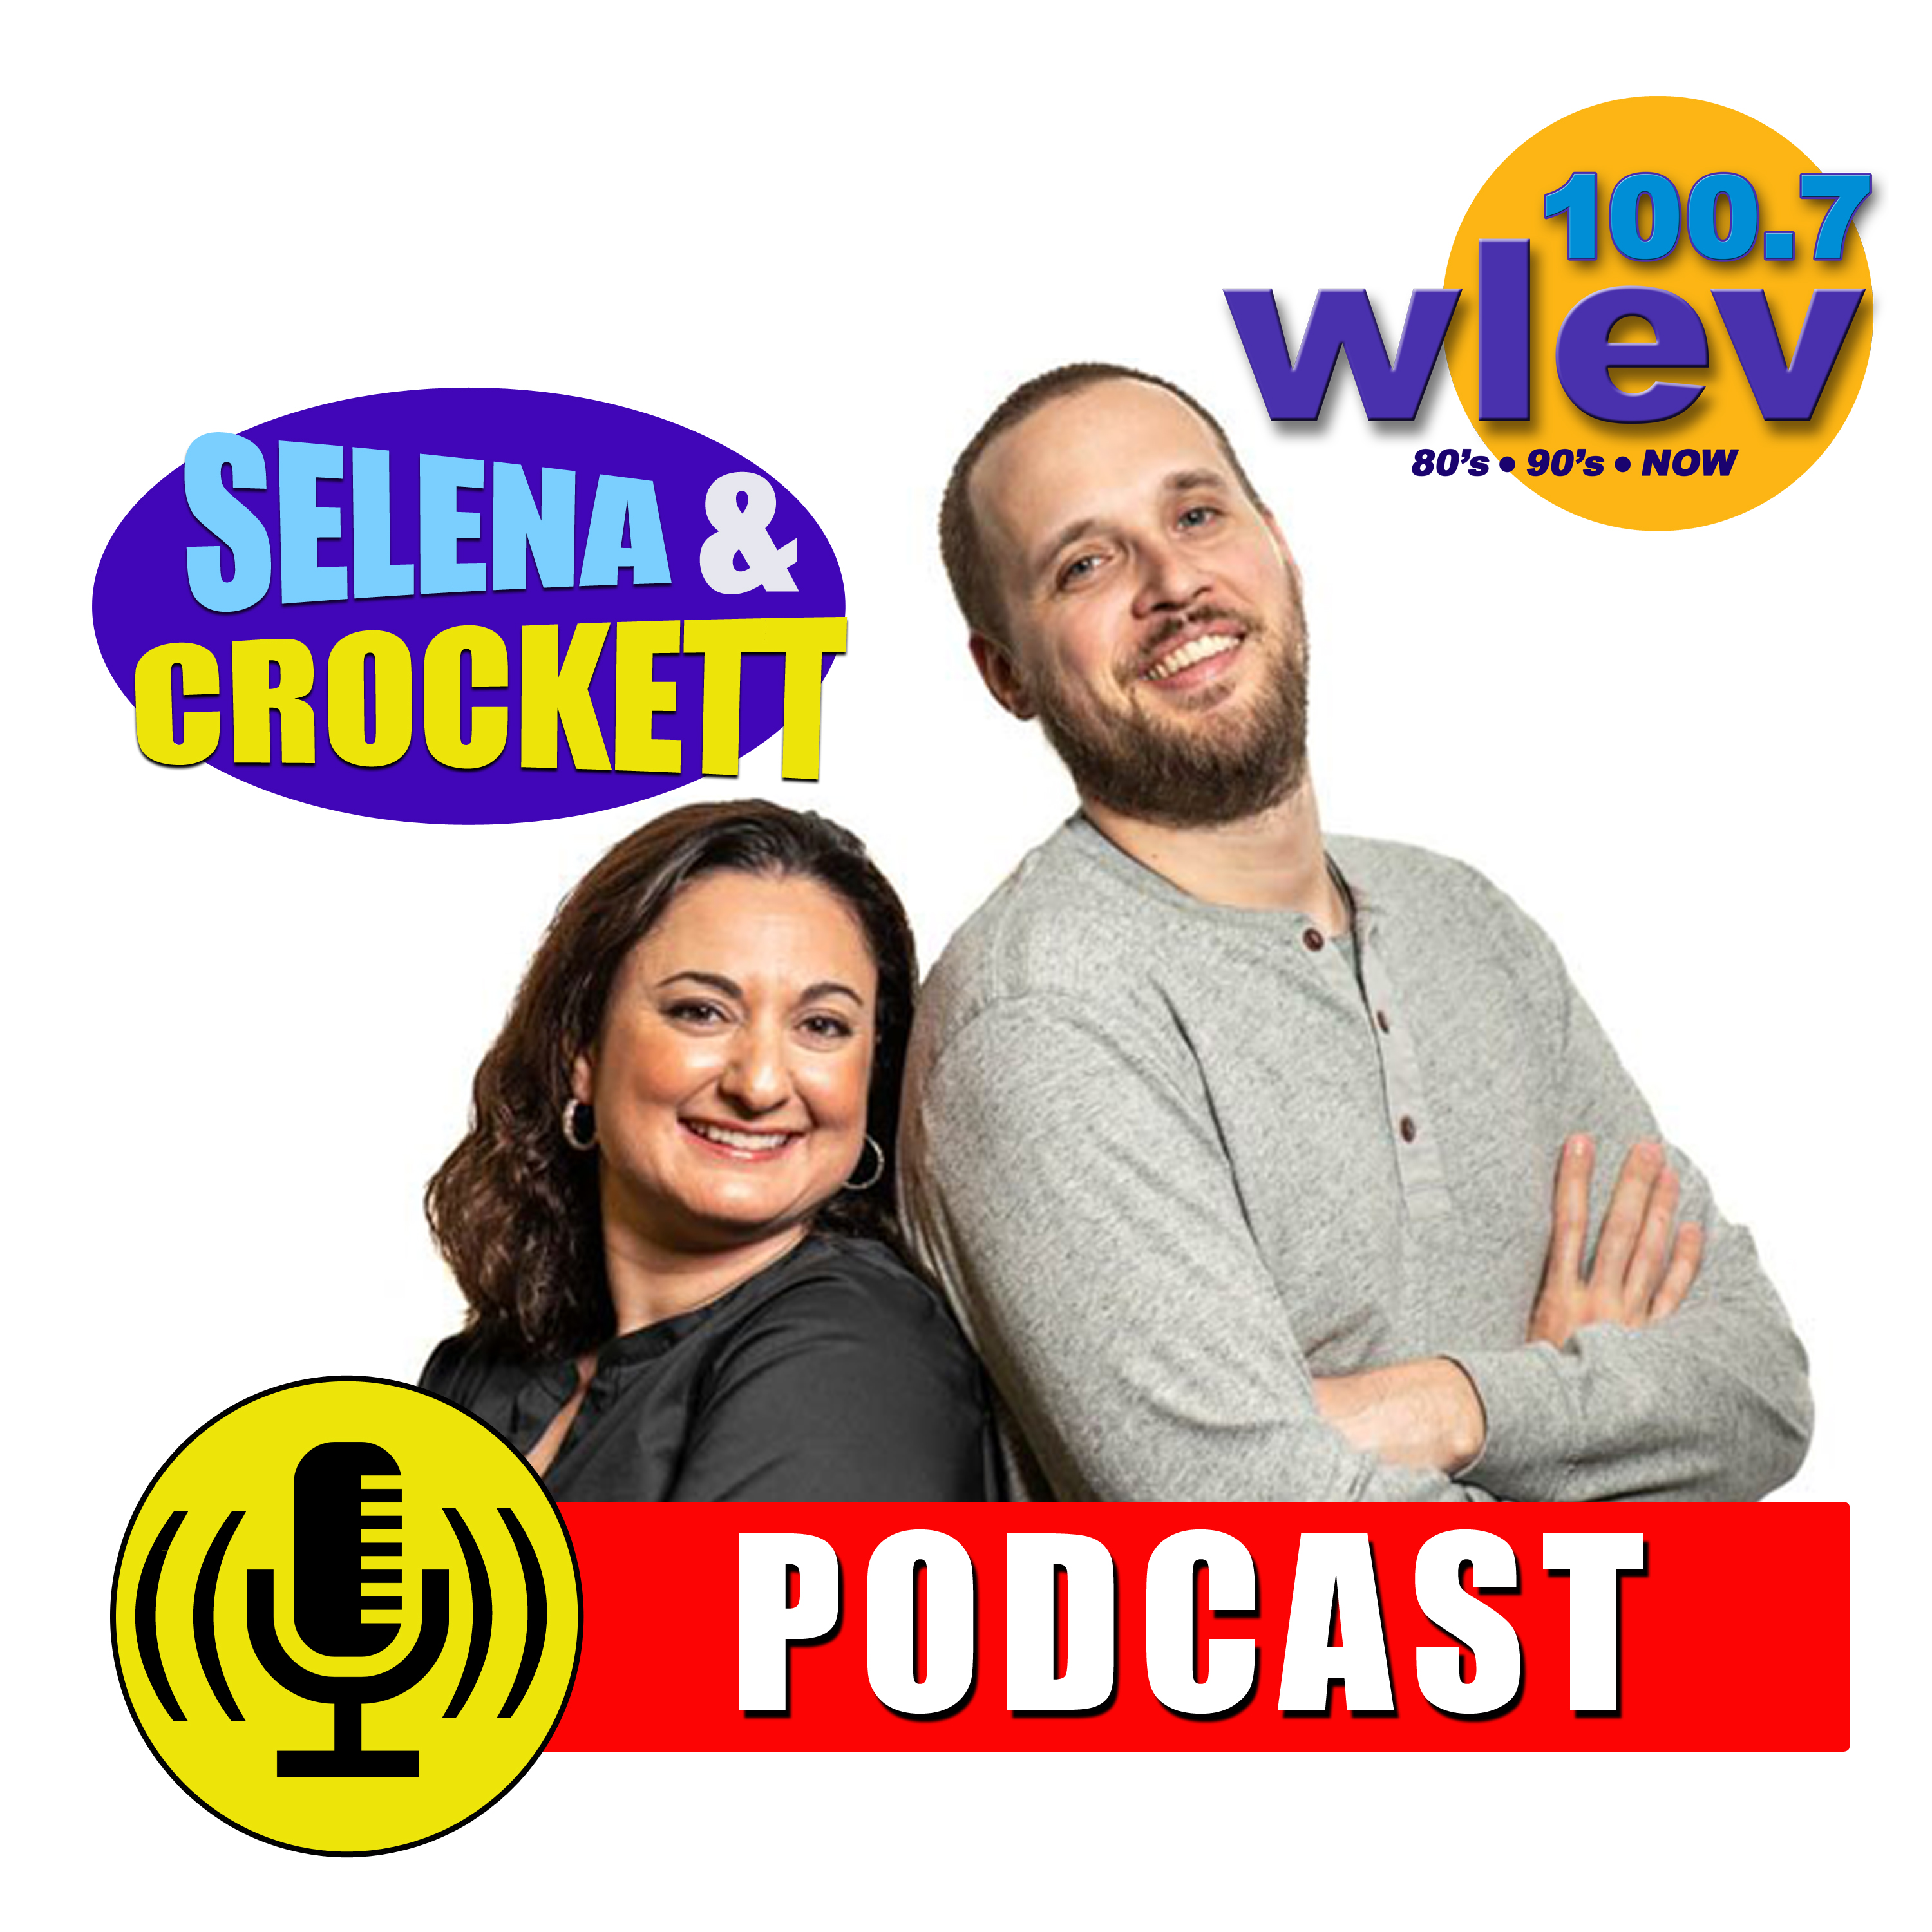 Ep 195 - Selena Can't Be Stopped Today - You Can Only Hope to Contain Her